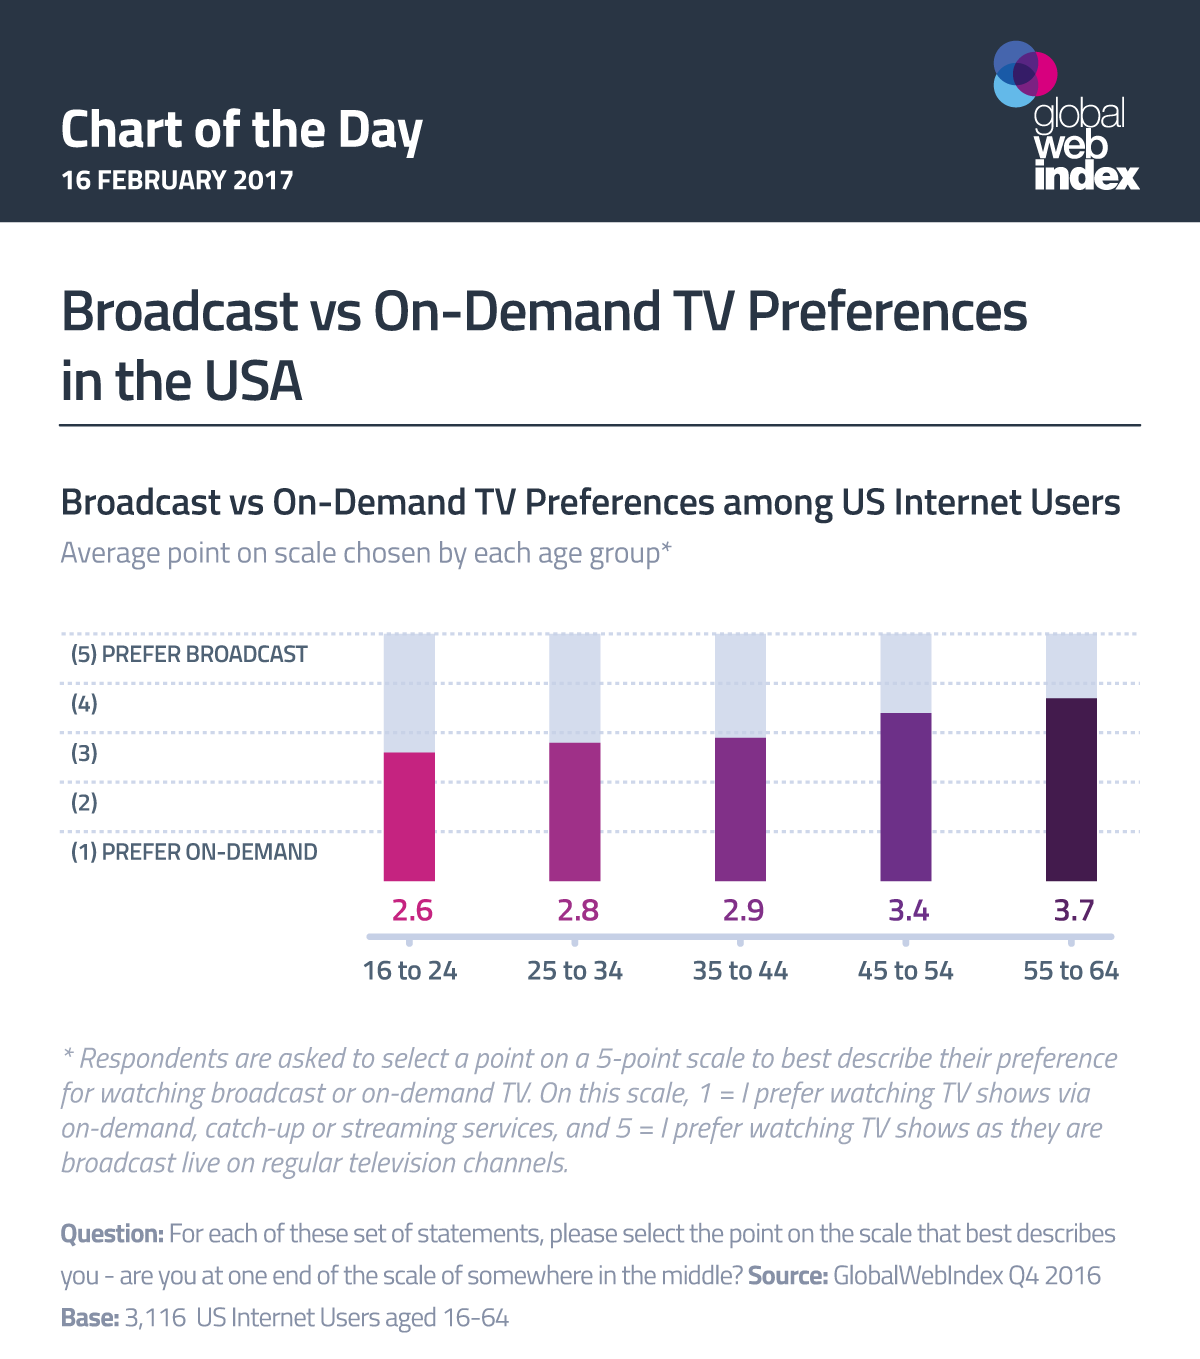 Broadcast vs On-Demand TV Preferences in the USA